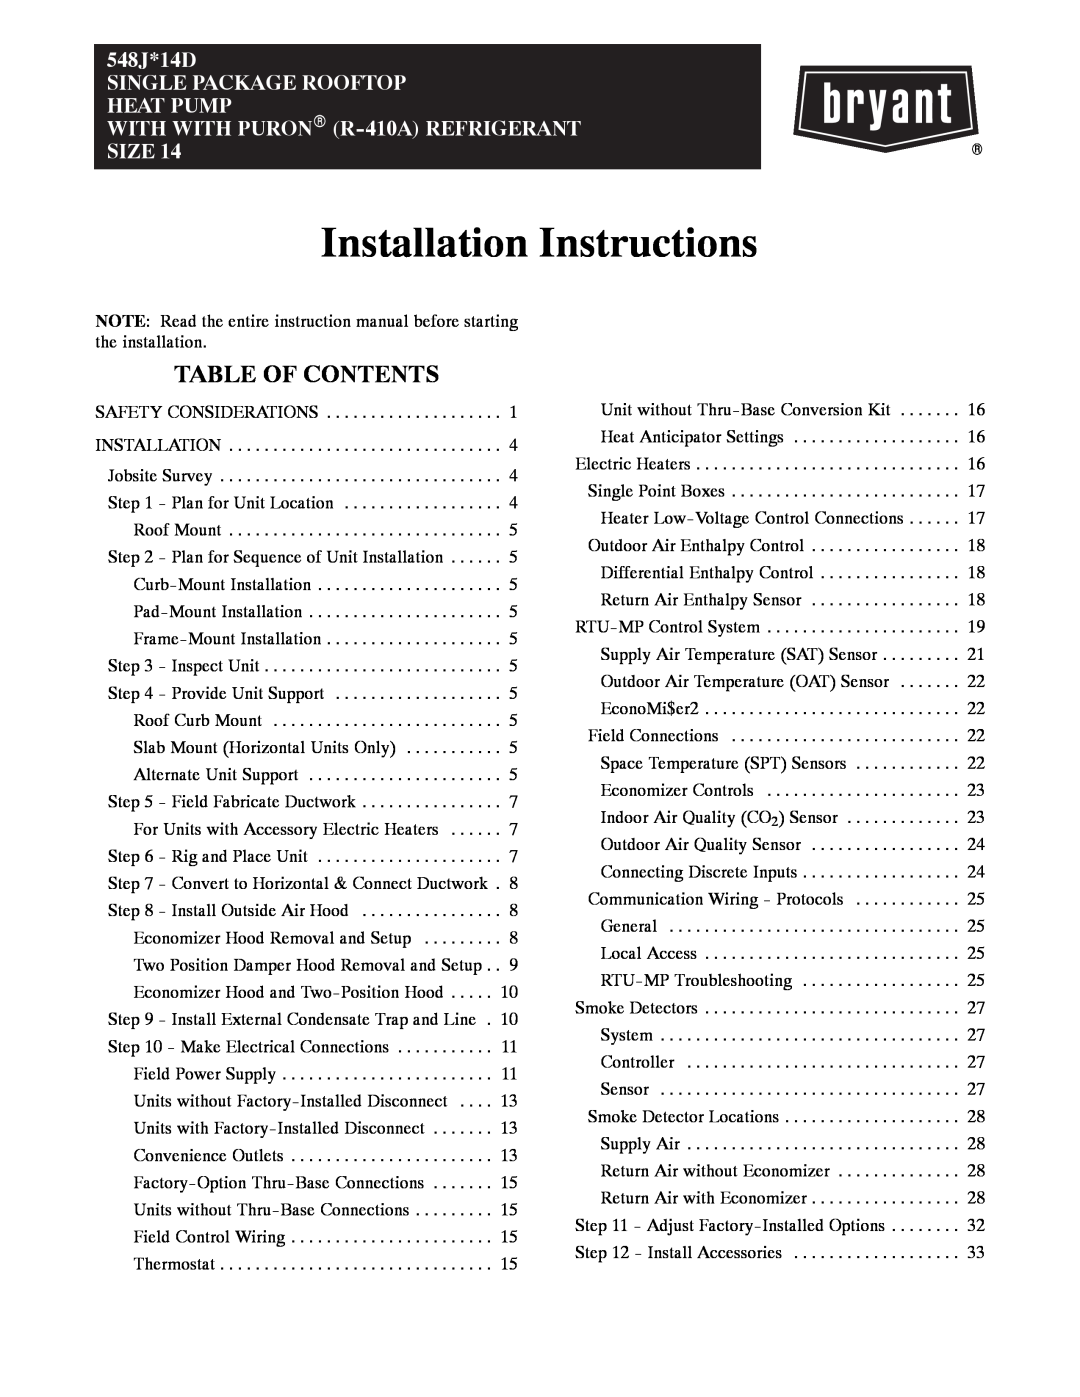 Bryant 548J*14D installation instructions Table Of Contents, Installation Instructions 